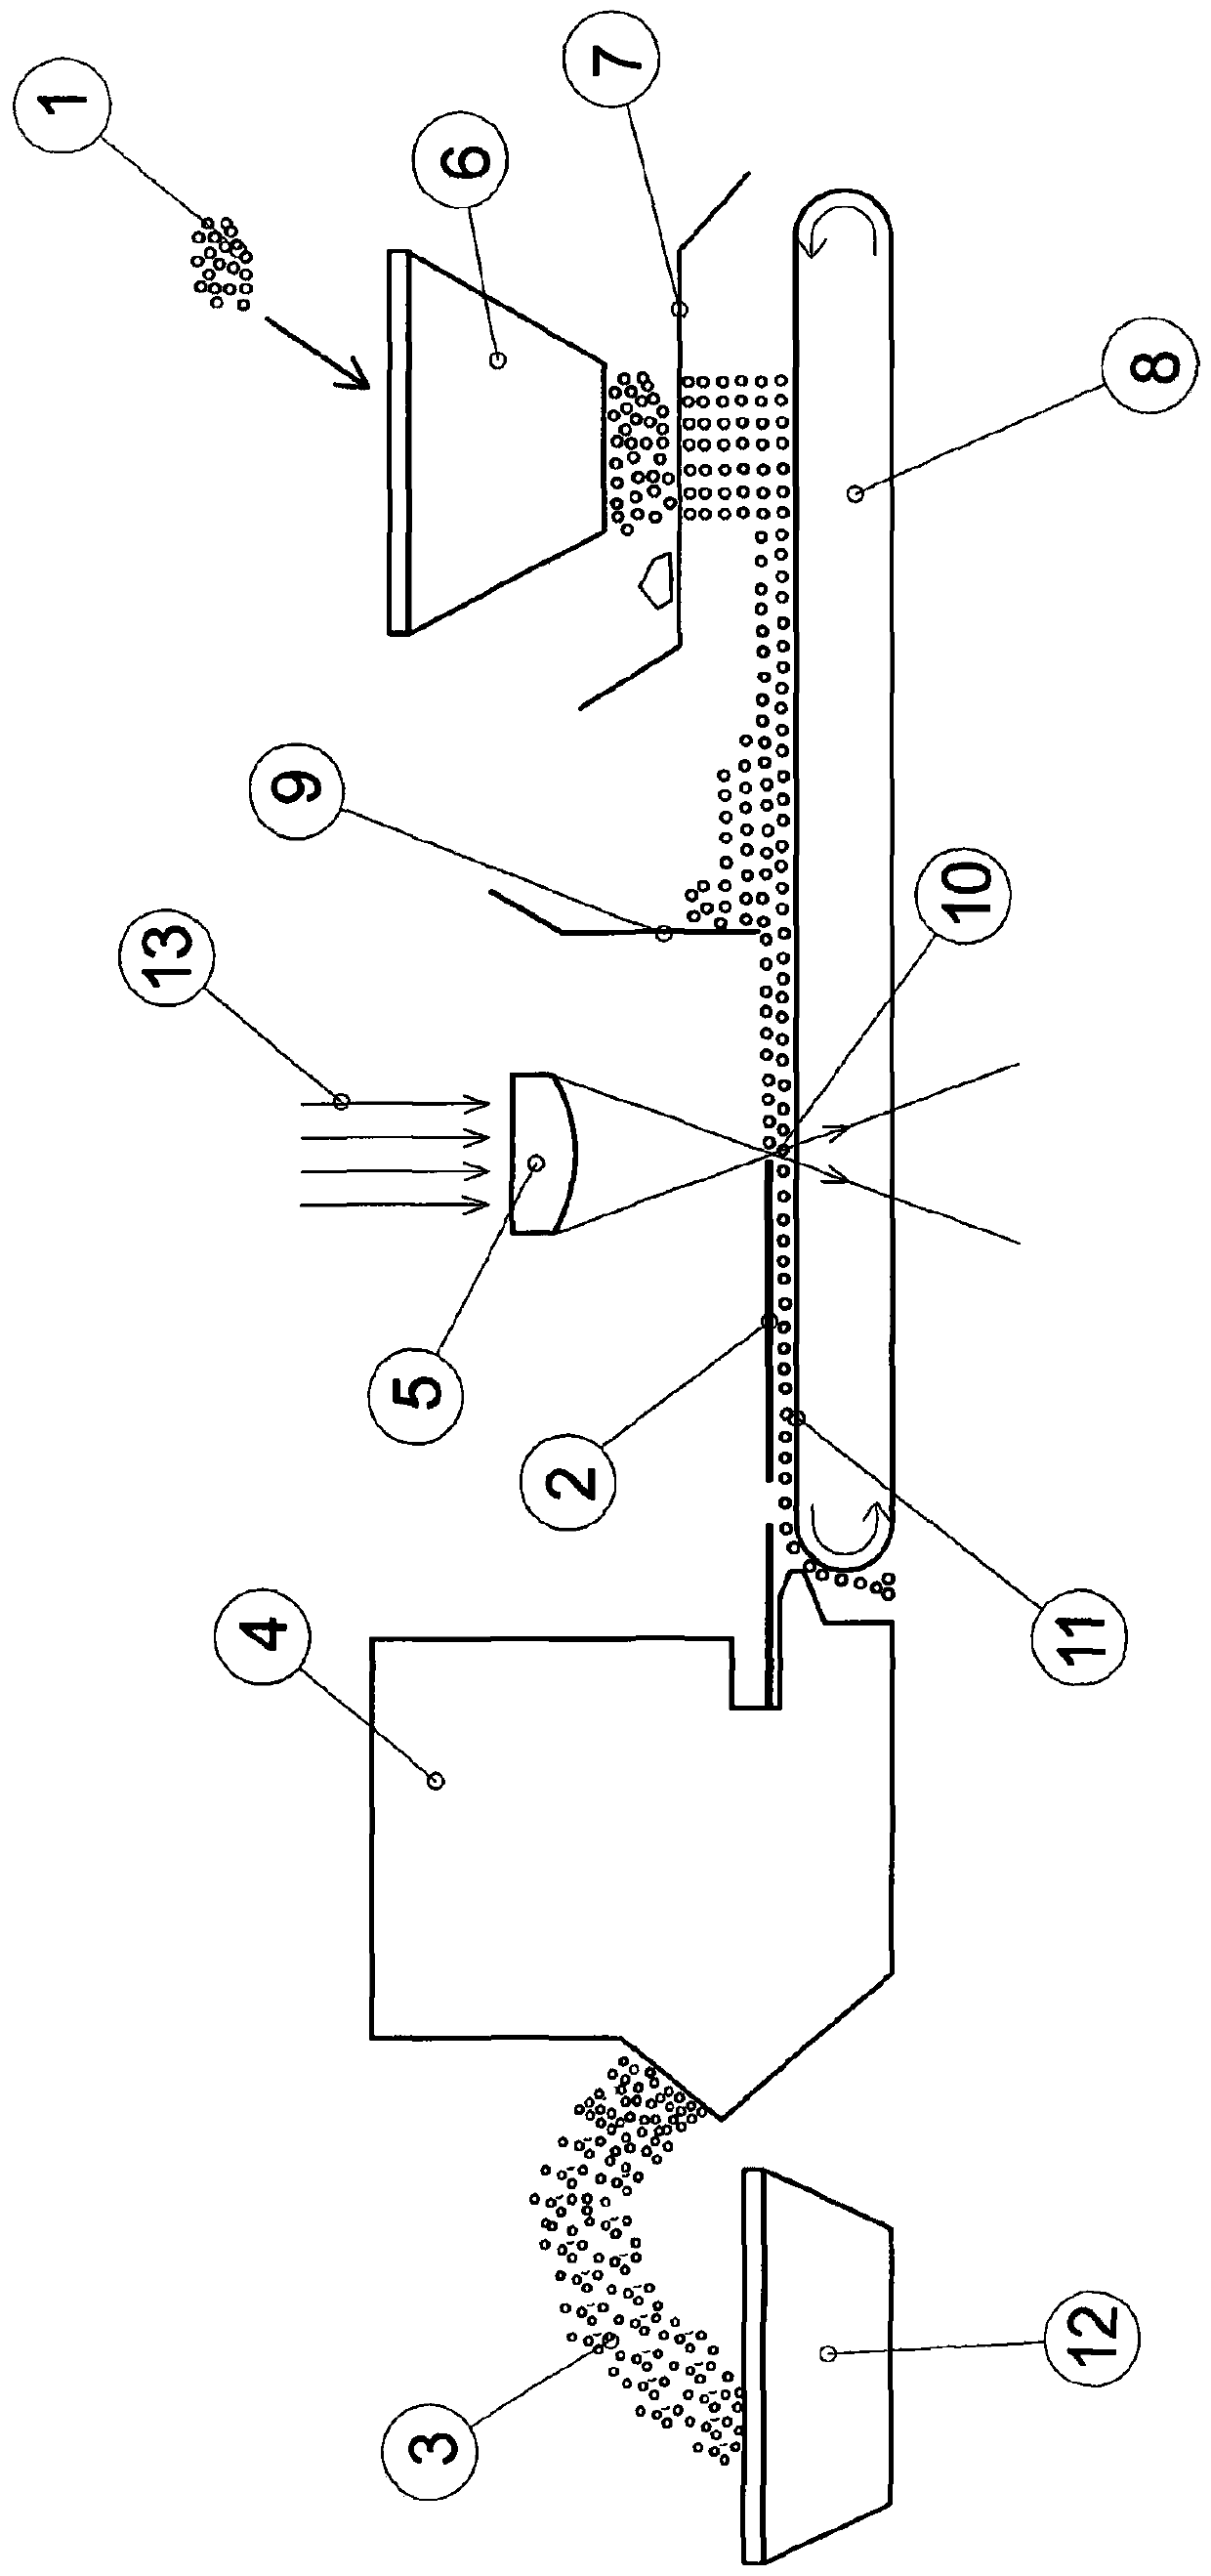 Method and device for producing crushed sand by heat treatment of desert sand as starting material